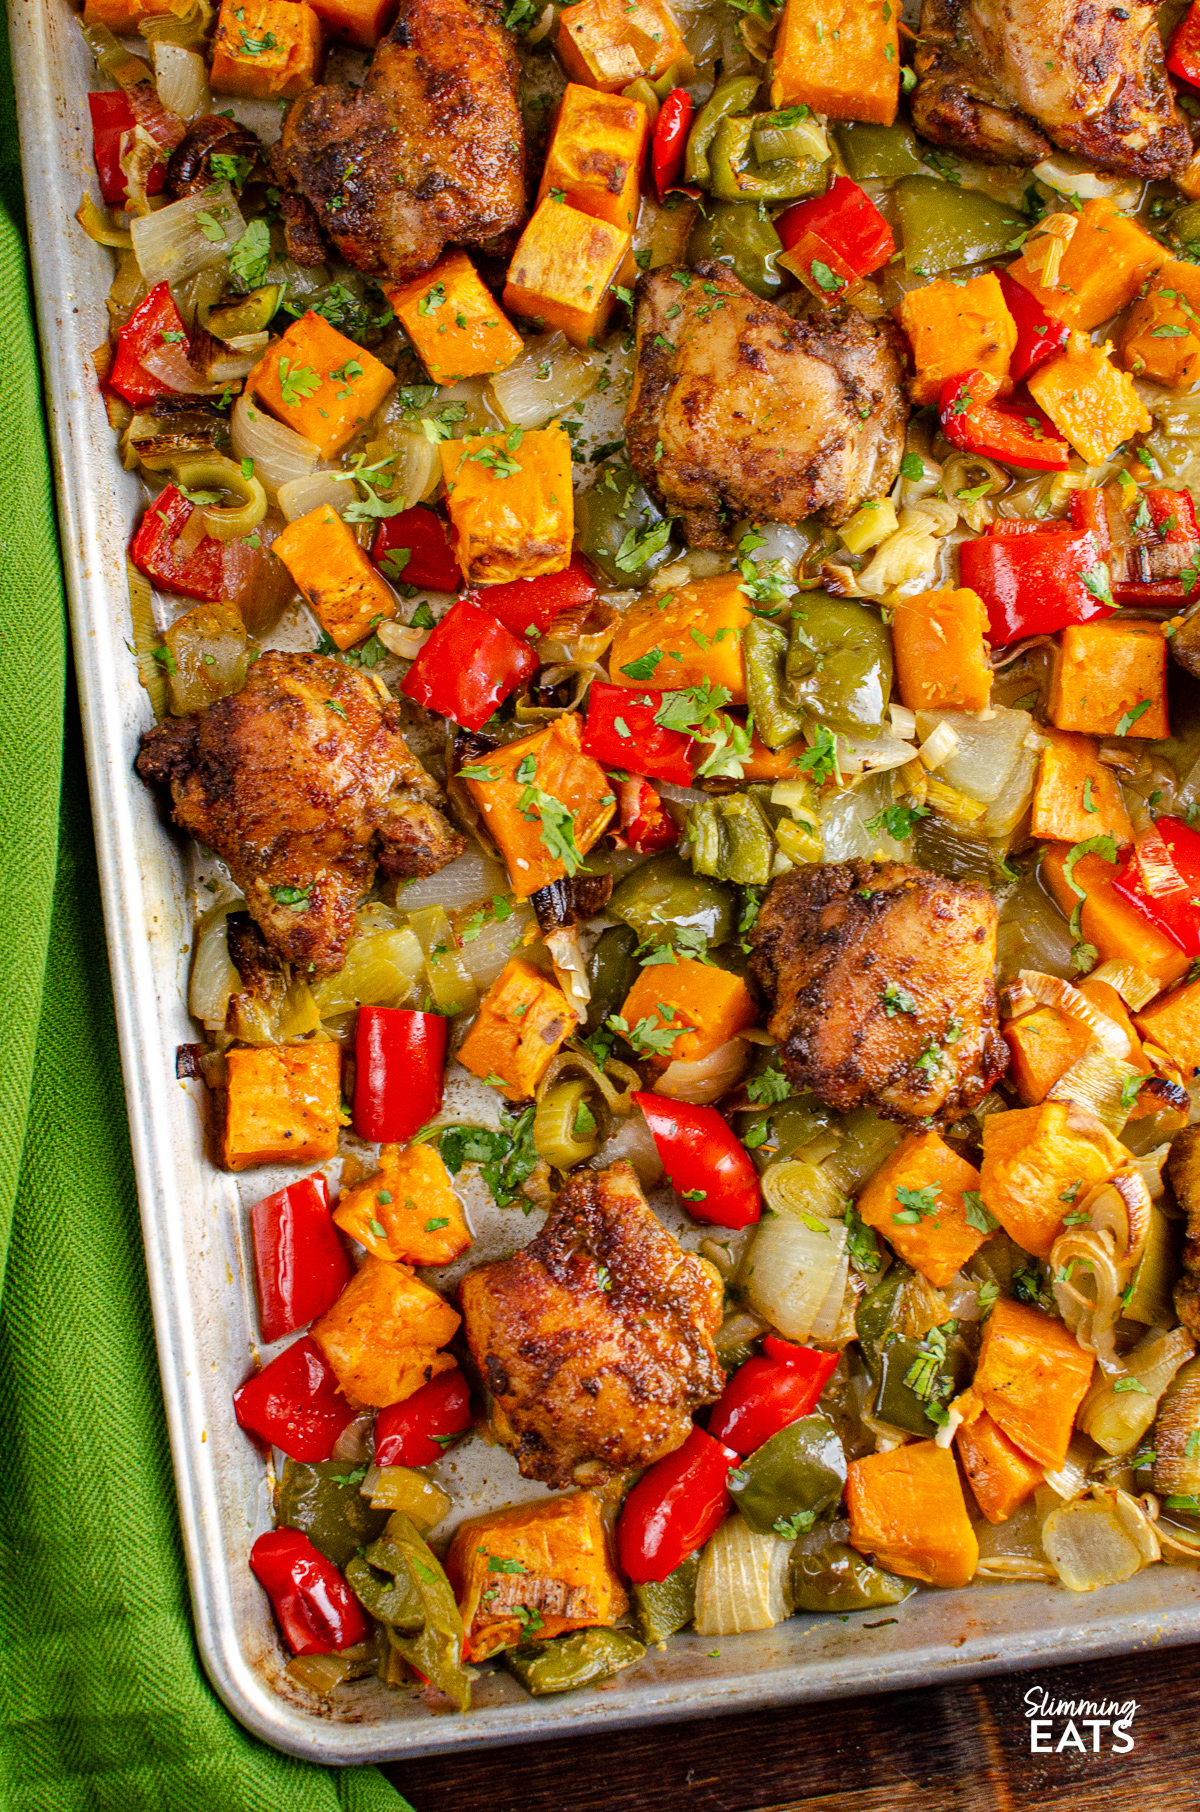 Seasoned Chicken and Roasted Sweet Potato and vegetables baked on a  Tray